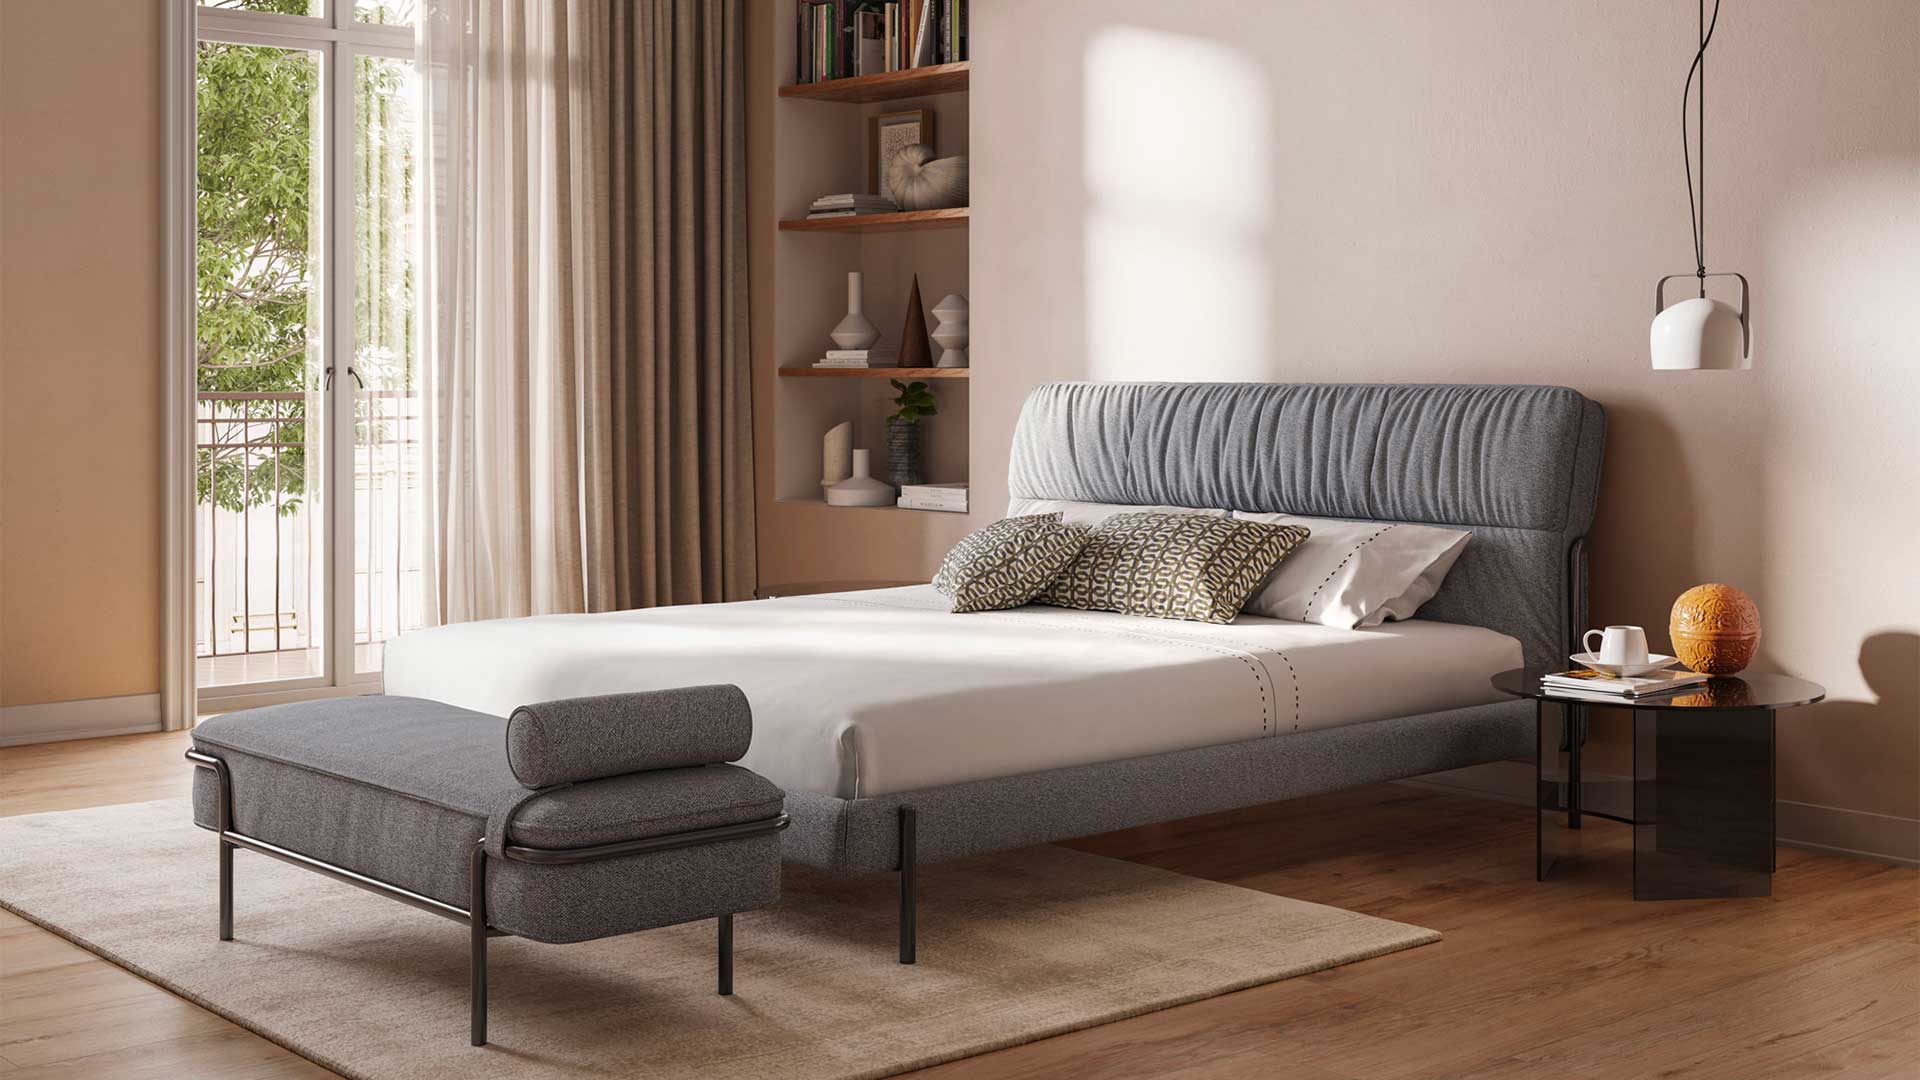 Natuzzi Editions beds bedroom furniture italian cyprus Takis Angelides Furnihome beds with storage